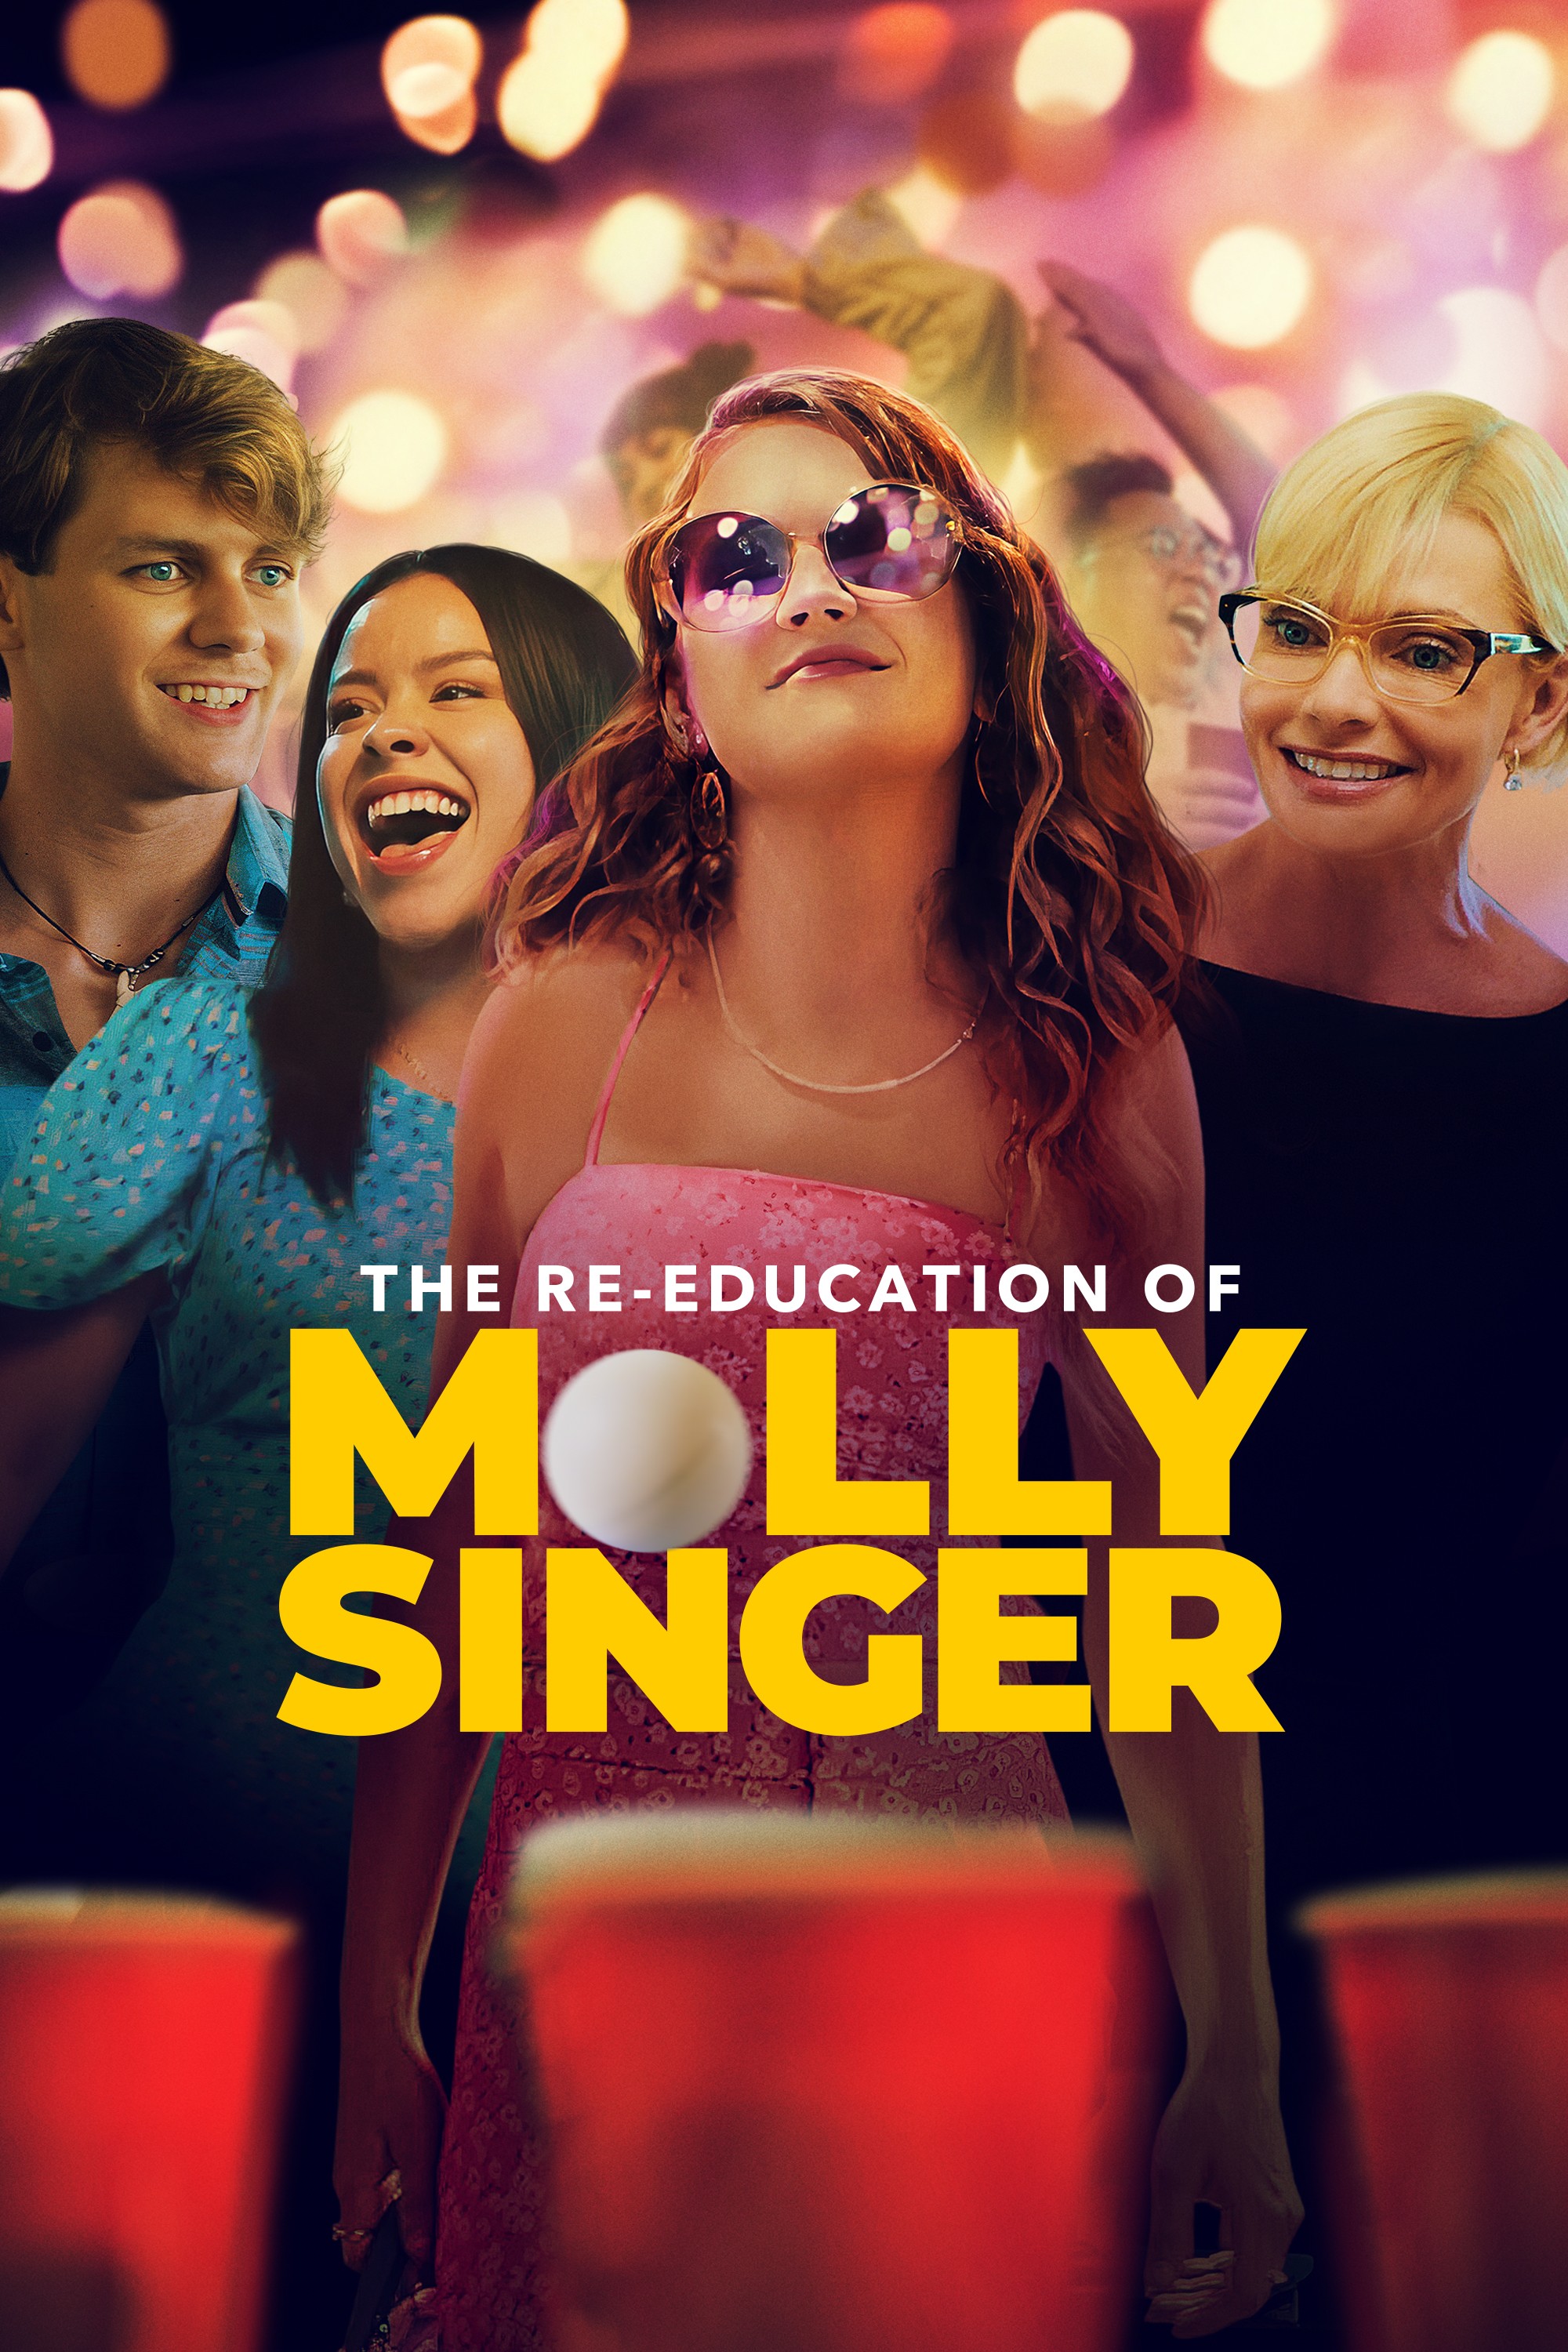 The Re-Education of Molly Singer (2023) 480p HDRip Full English Movie [500MB]